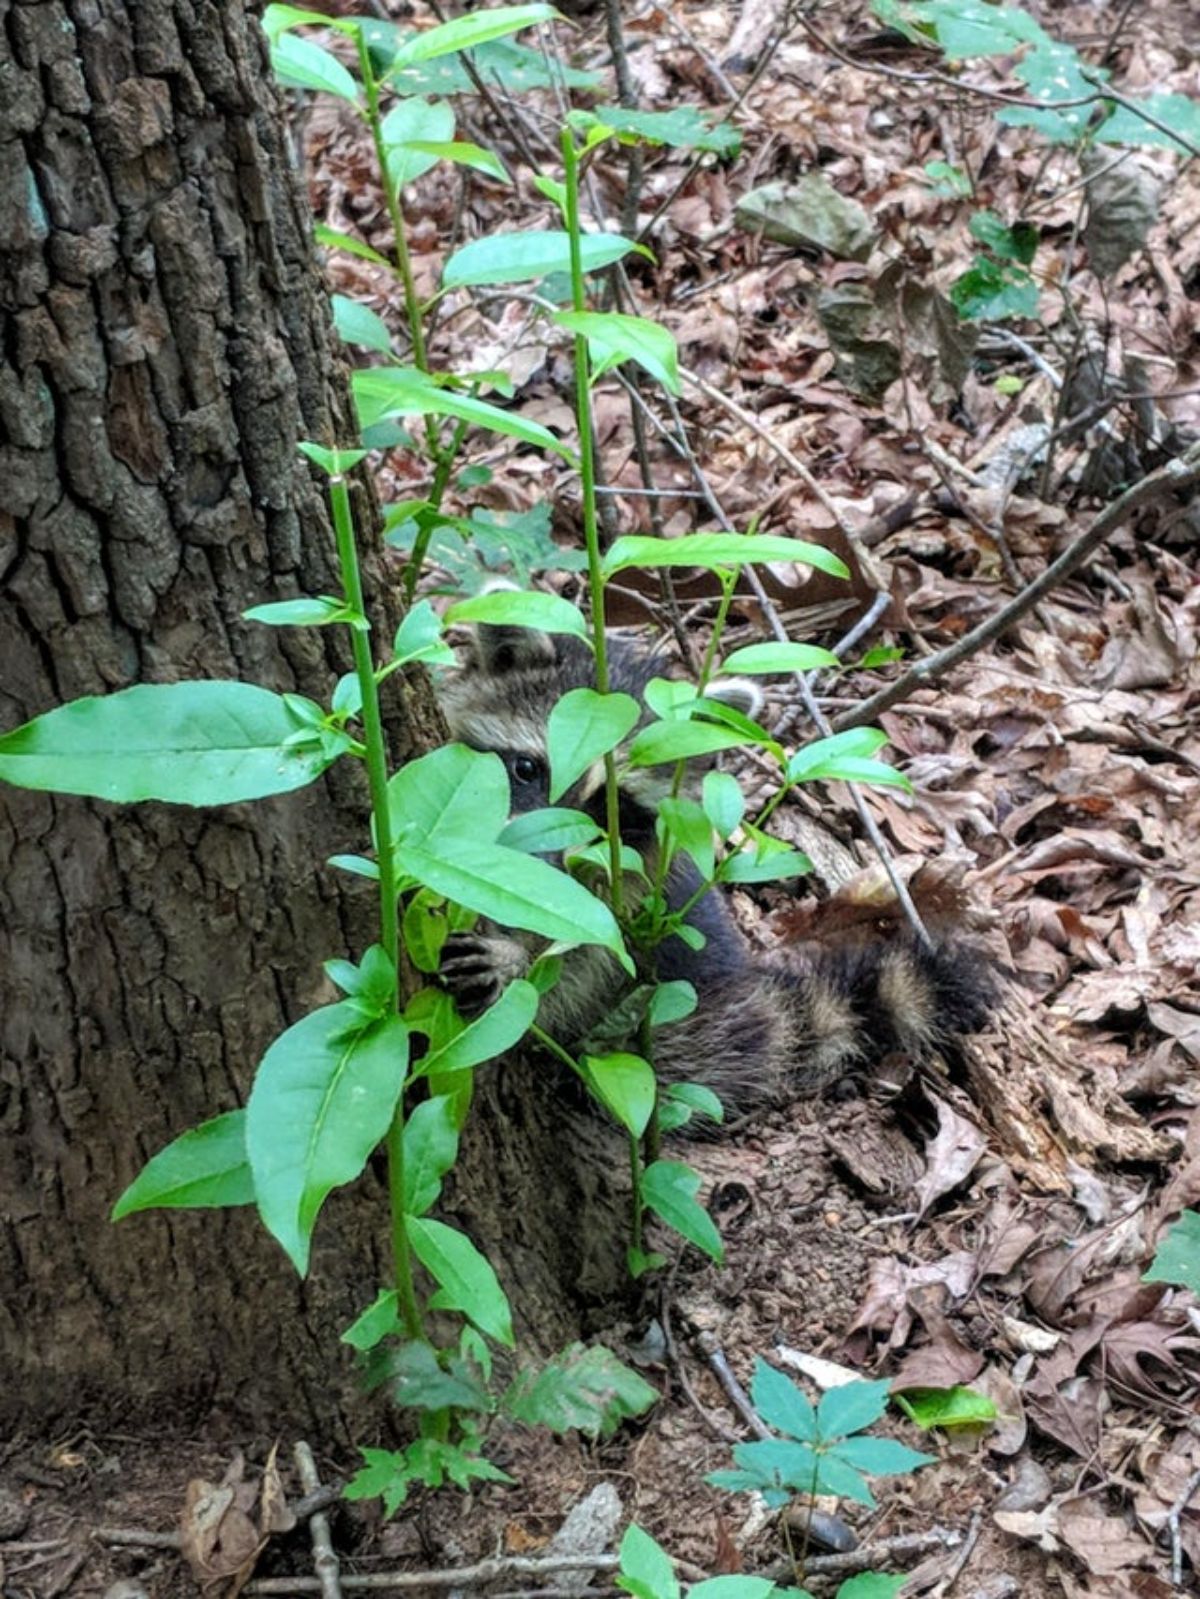 baby raccoon hiding behind a small plant while hugging a tree trunk